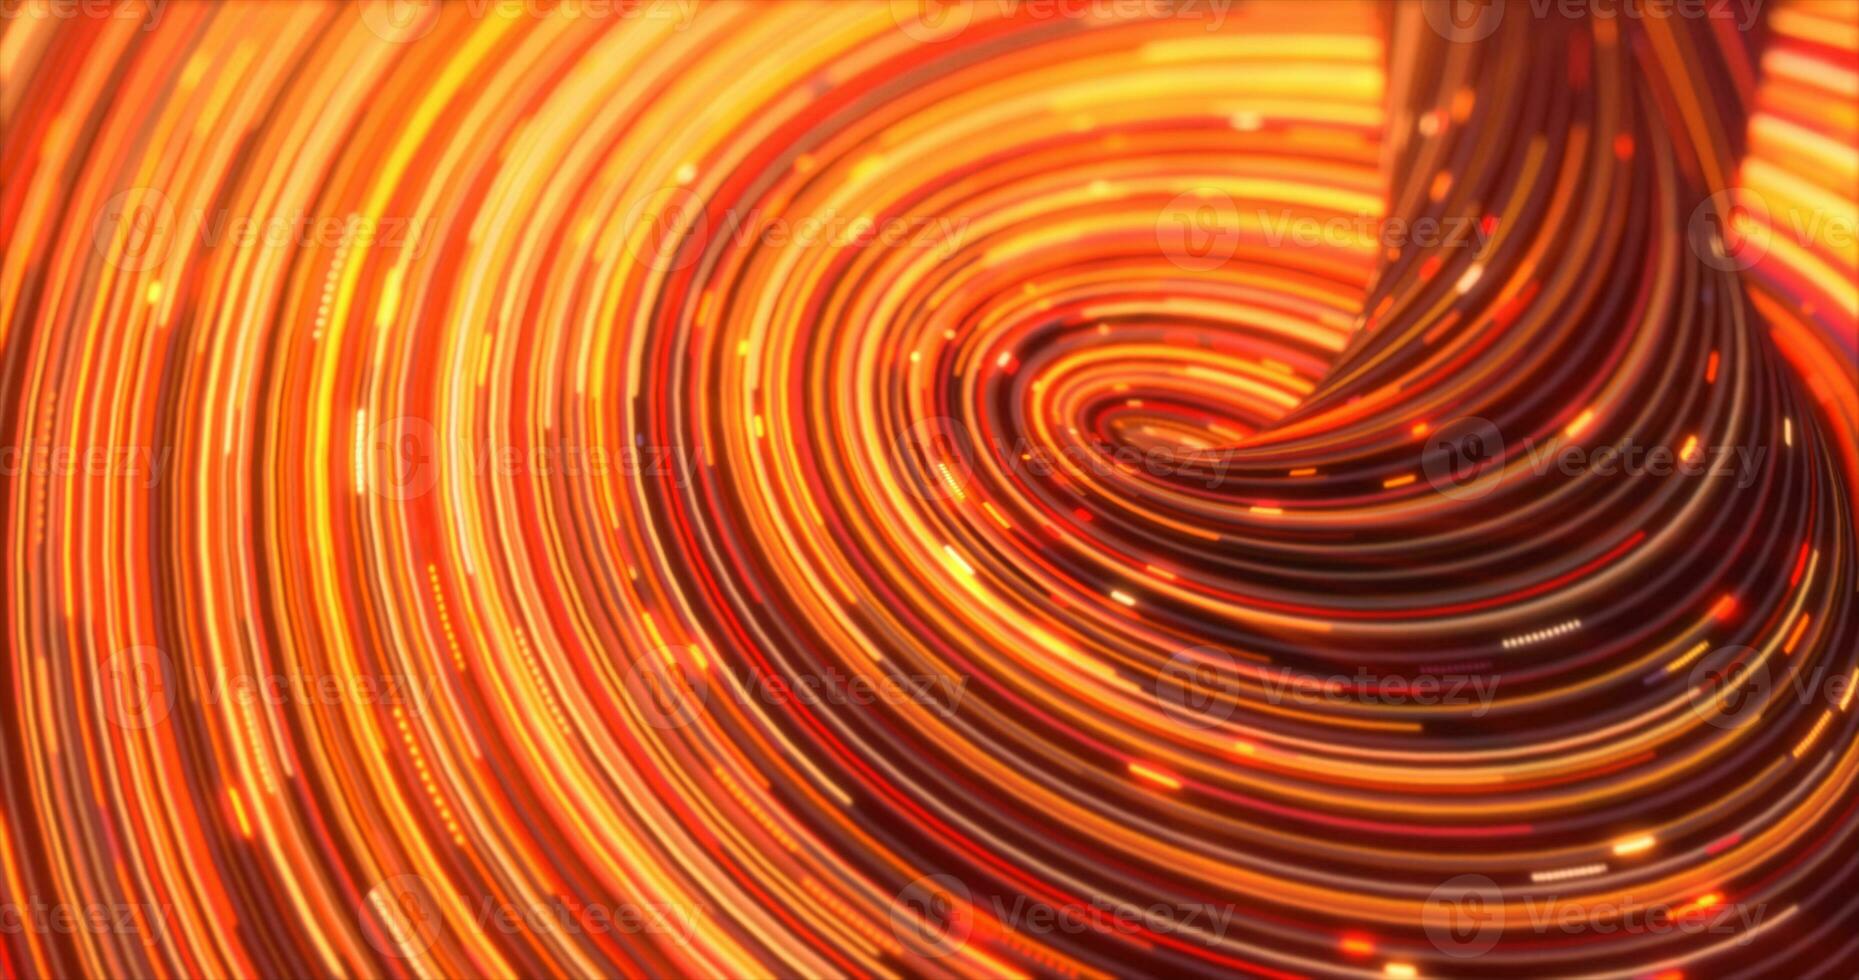 Orange yellow energy abstract swirling curved swirl lines of glowing bright magical energy streaks and flying particles background photo